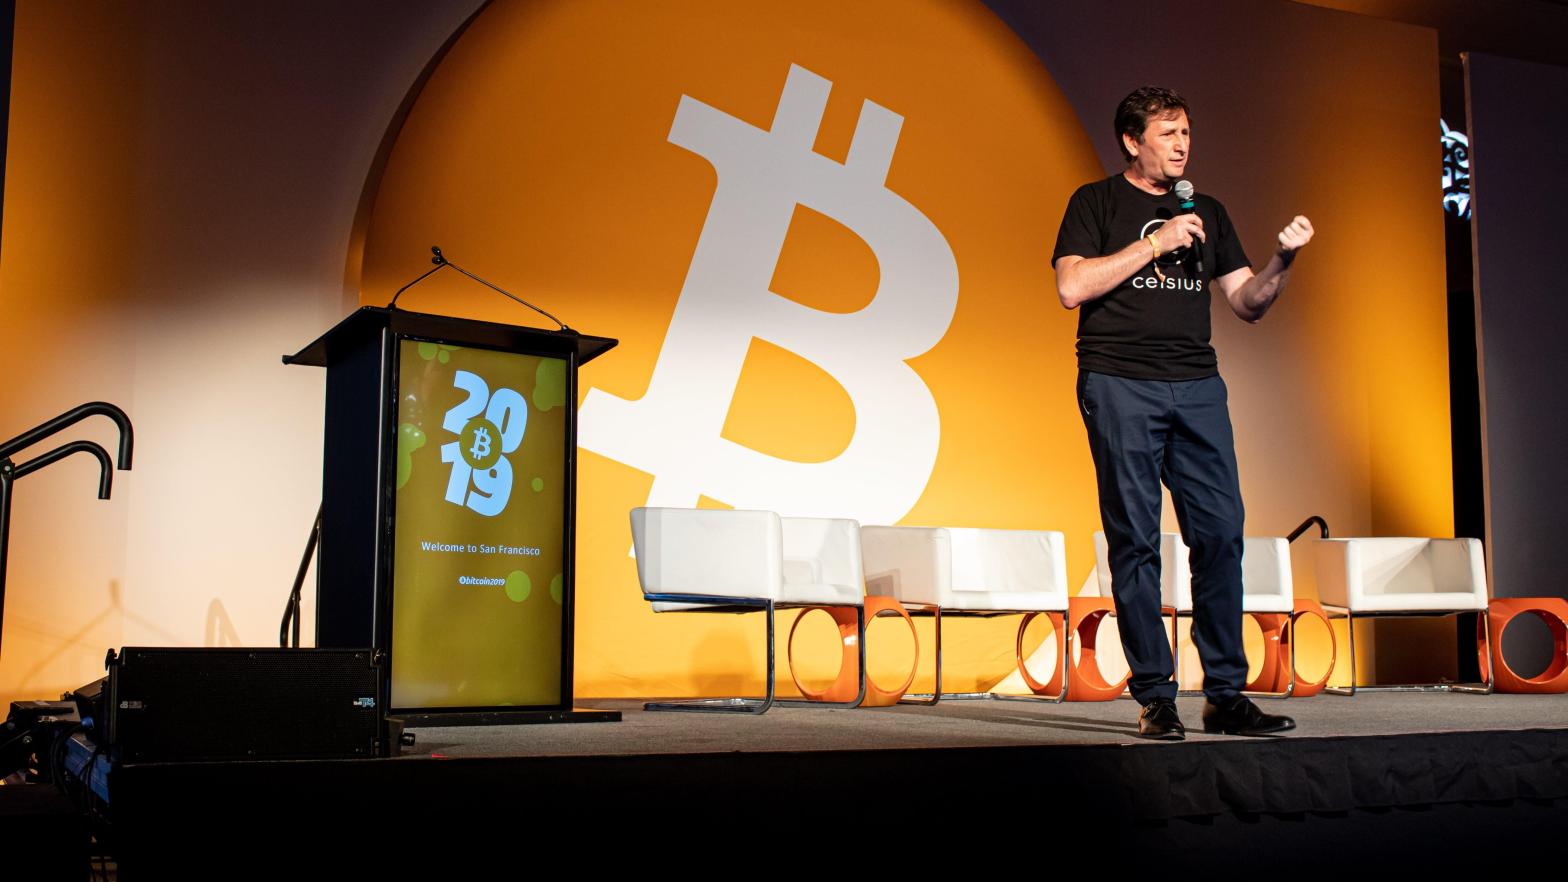 Alex Mashinsky, CEO of Celsius, once used interest rates as high as 18% in order to attract people to deposit their crypto on the platform. (Photo: Kevin McGovern, Shutterstock)